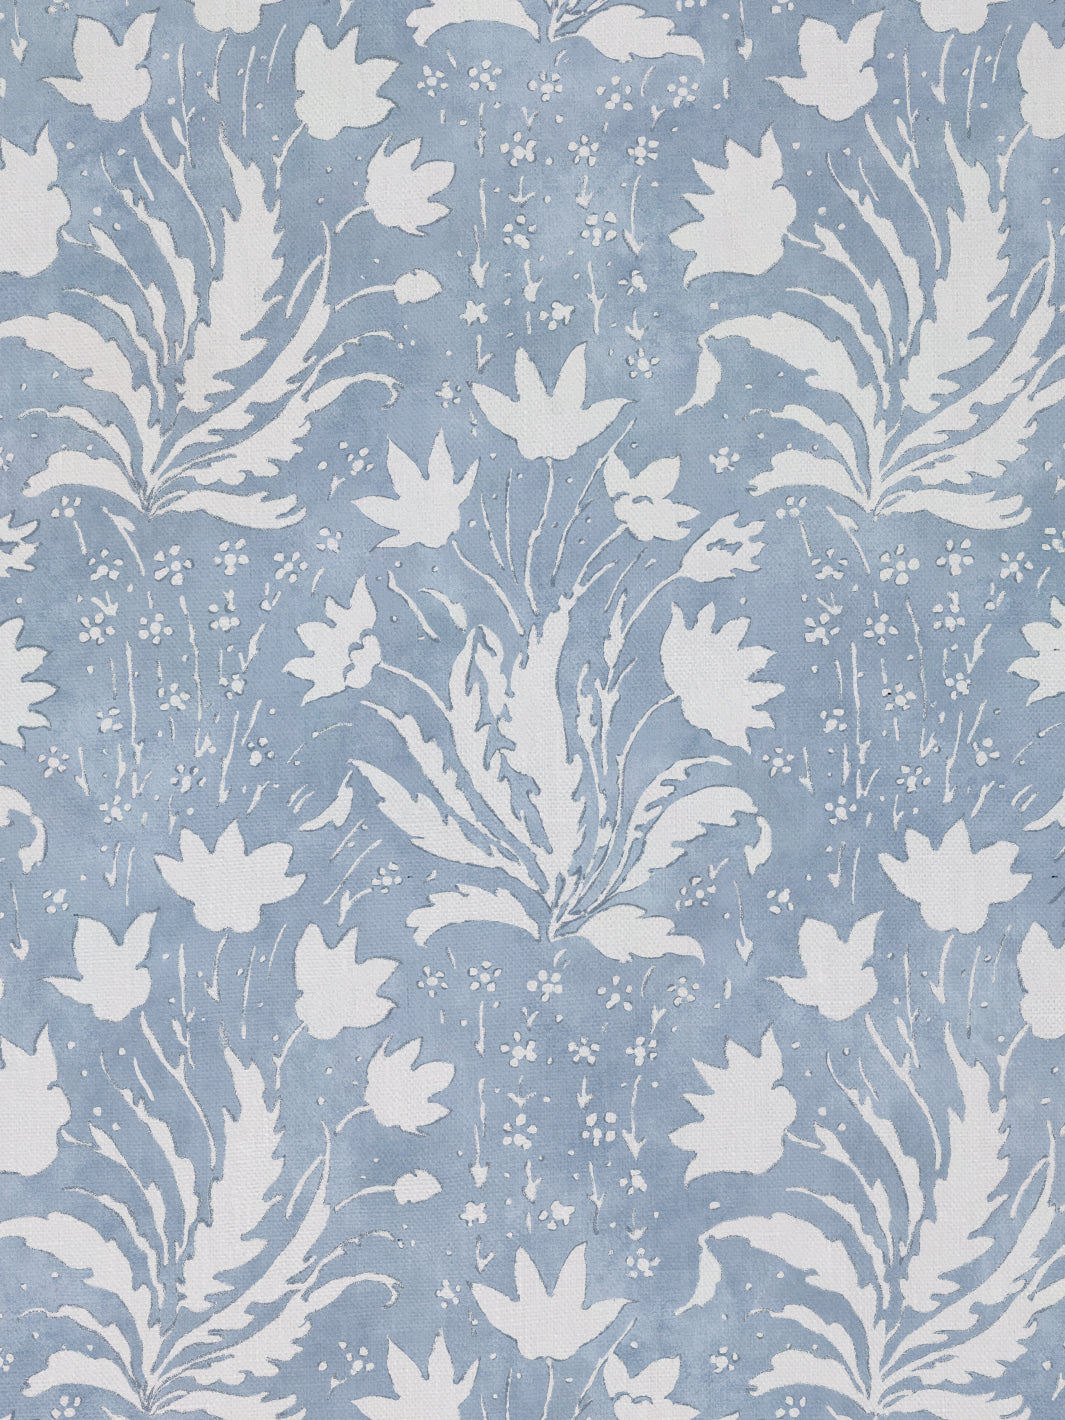 'Hillhouse Floral One Color' Linen Fabric by Nathan Turner - Light Blue